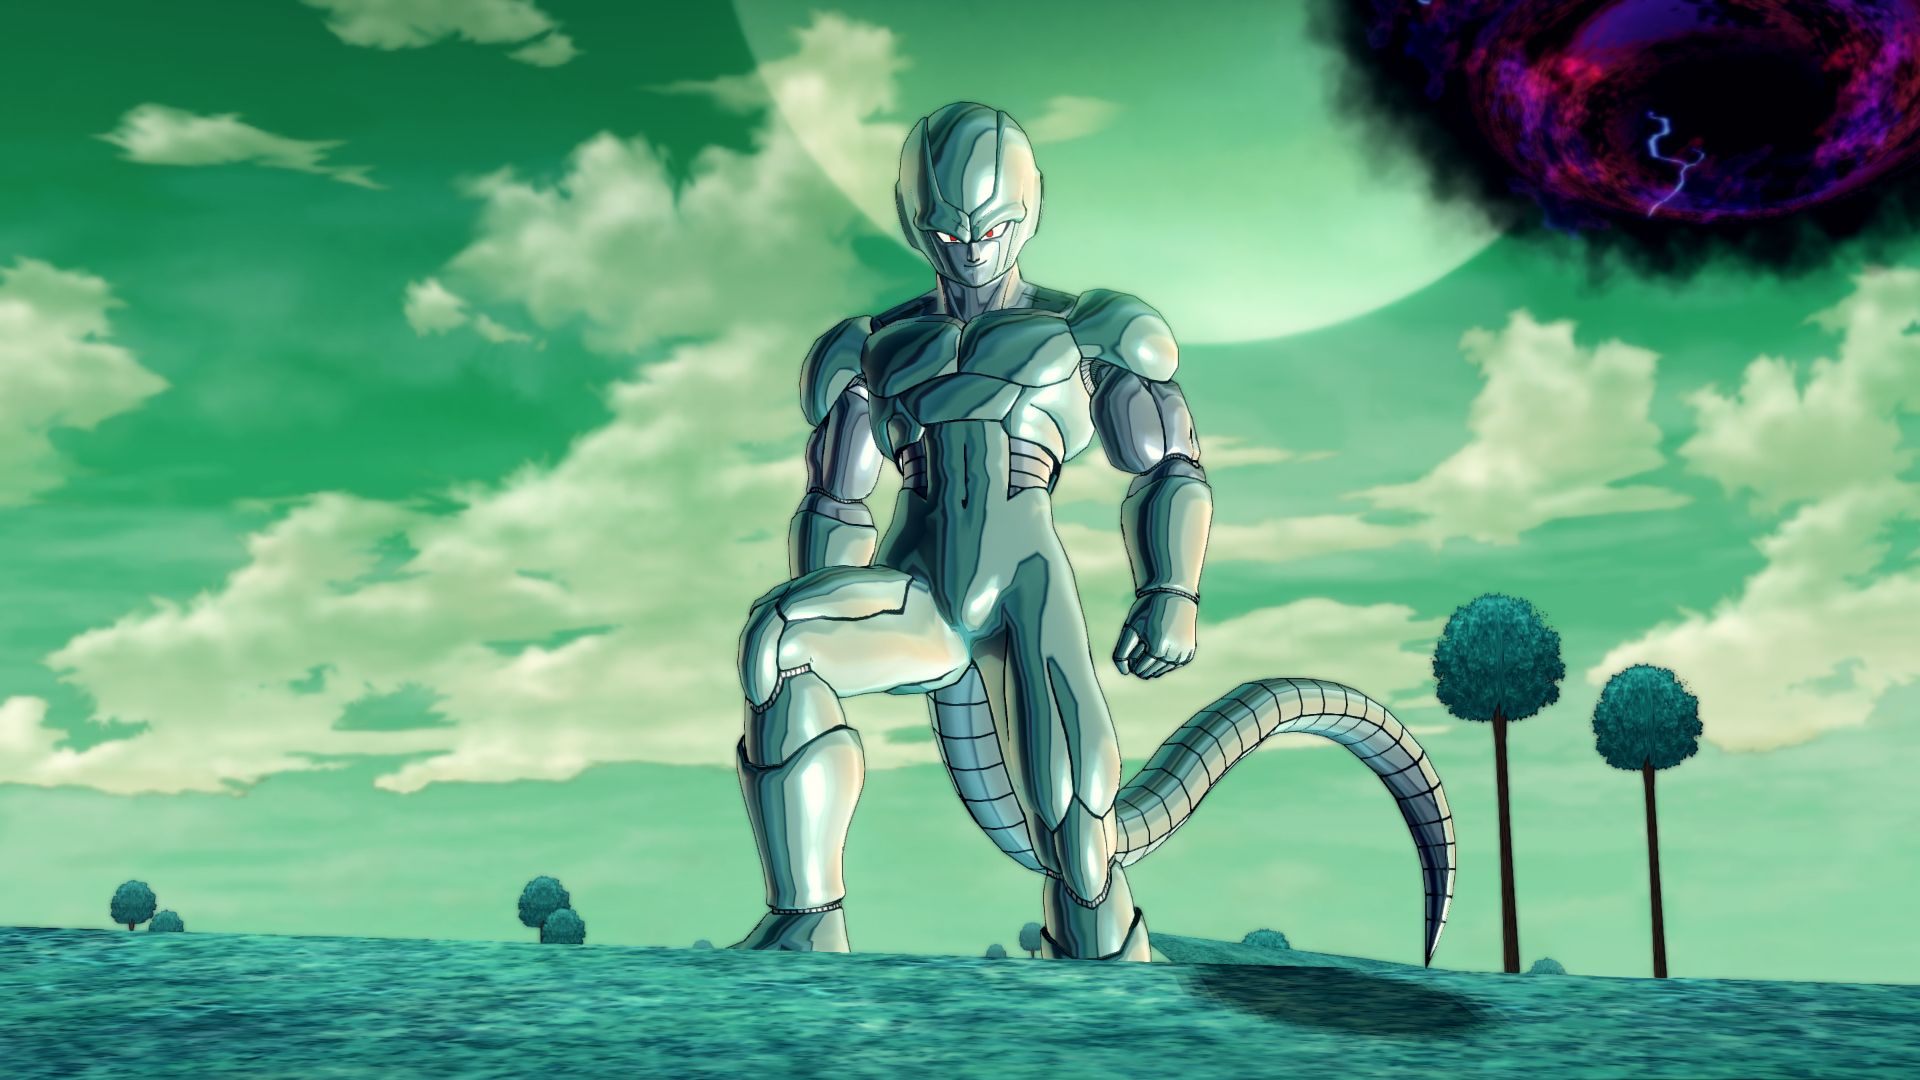 Dragon Ball Xenoverse 2 Gets Tons of 1080p Screenshots Reveal Metal Cooler, Nail and Much More